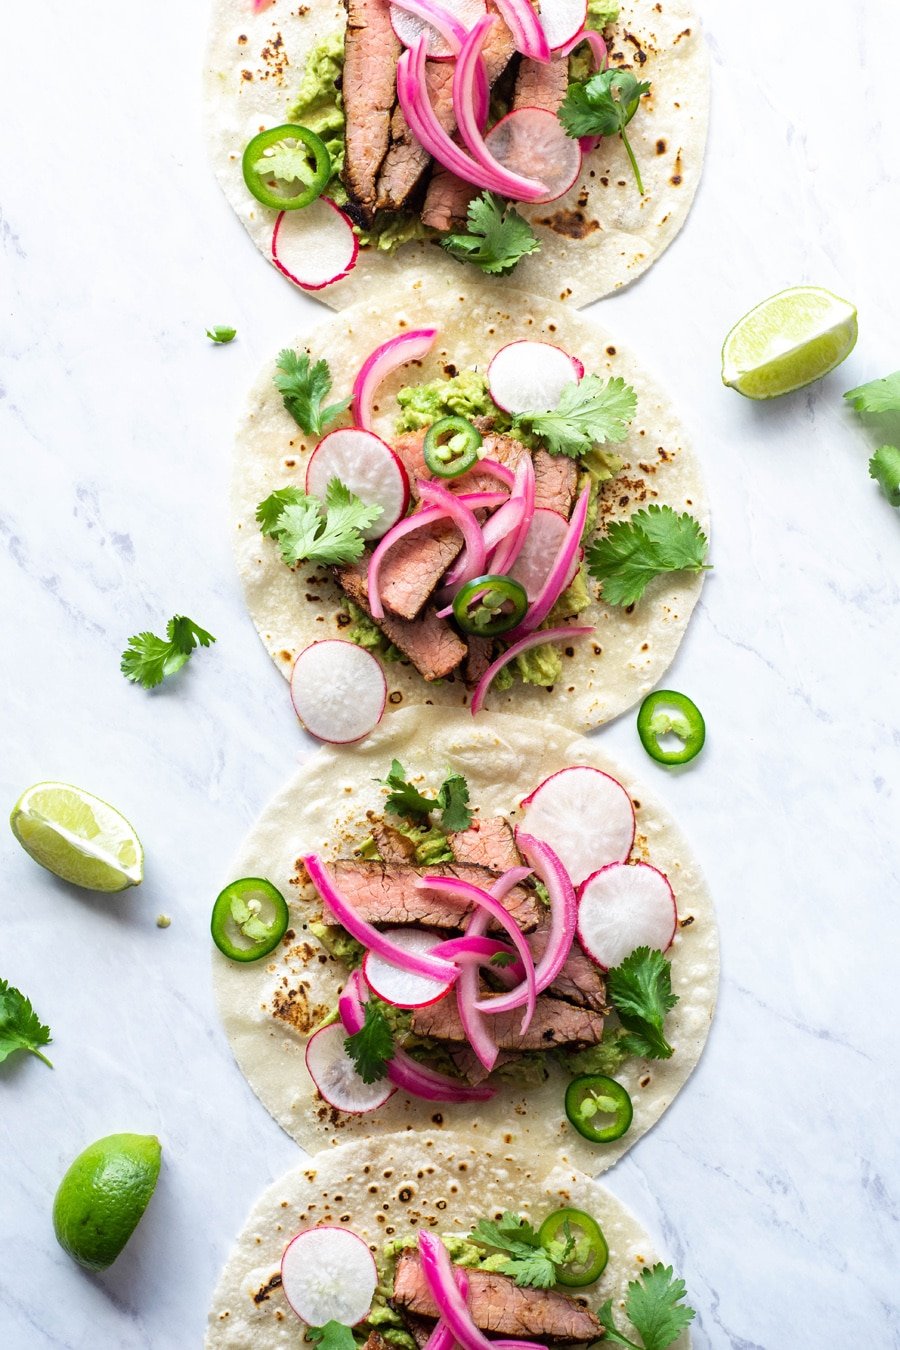 Multiple steak tacos lined up from the top to the bottom of the image on a white background with cilantro, thinly sliced jalapeno, pickled red onions